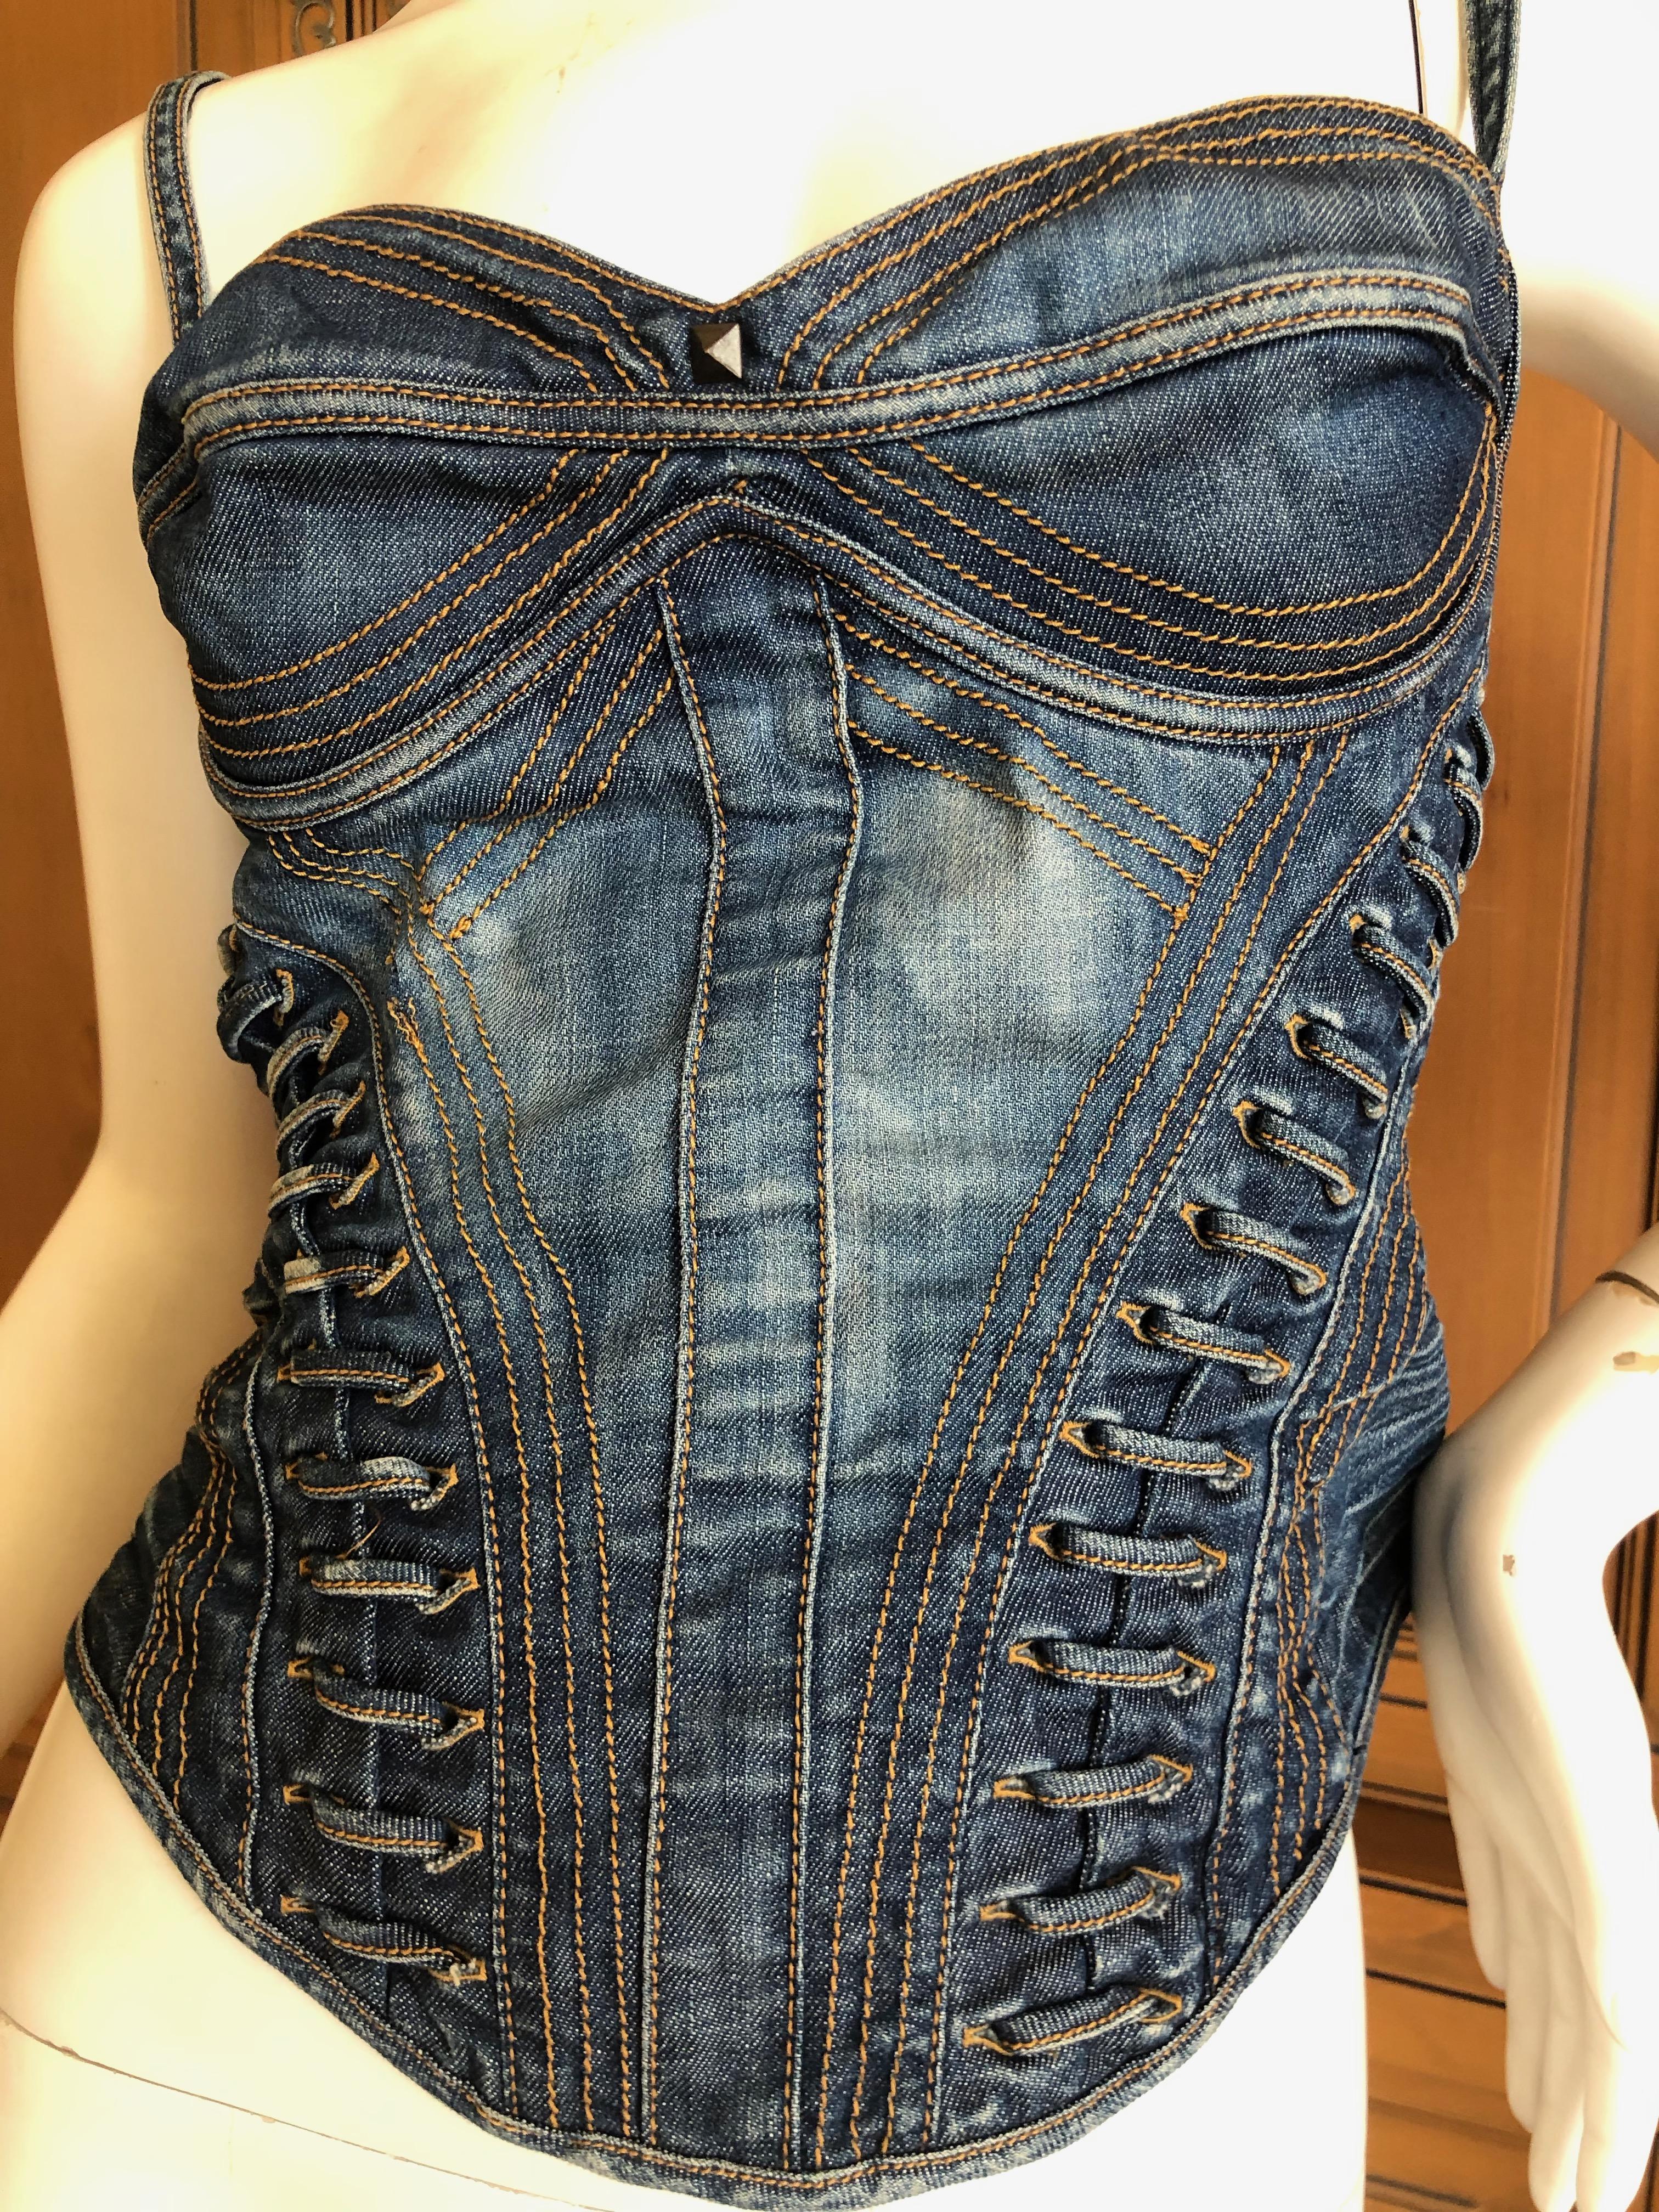 Black Roberto Cavalli for Just Cavalli Denim Corset with Lace Up Details New Tags